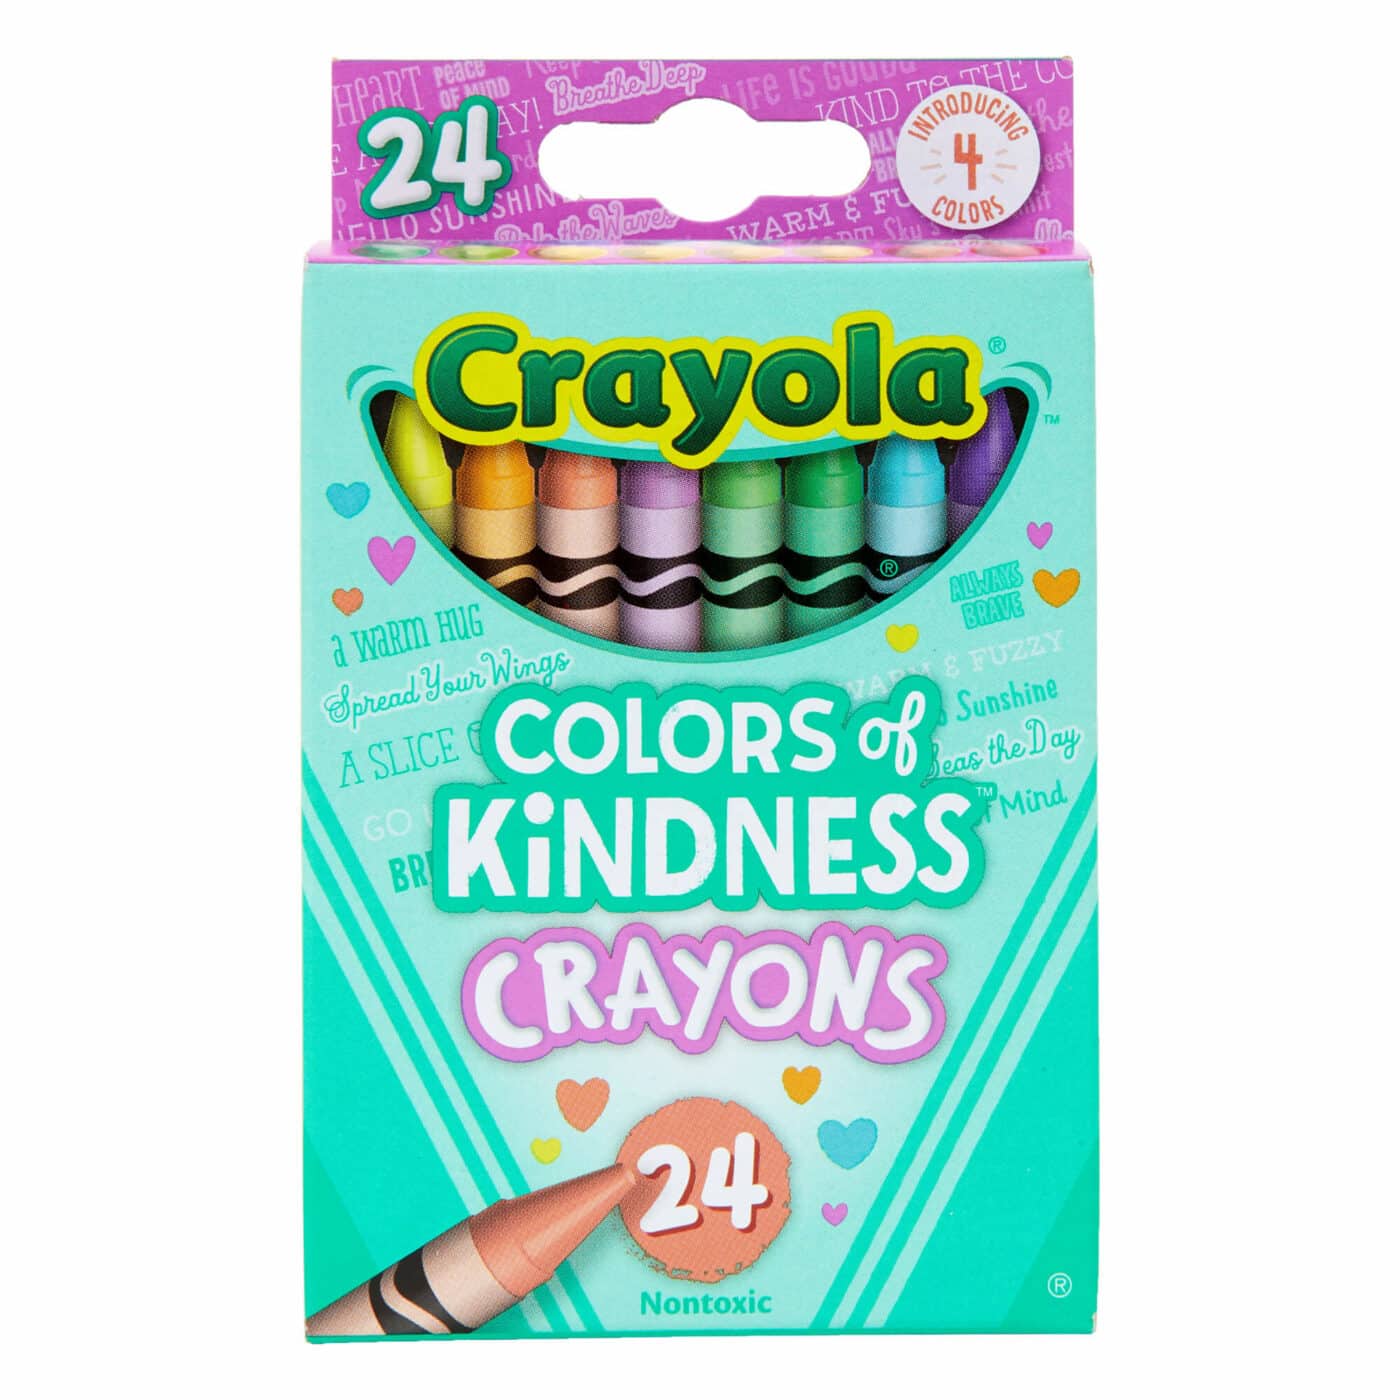 Crayola Colours of Kindness Crayons - 24 Pack2